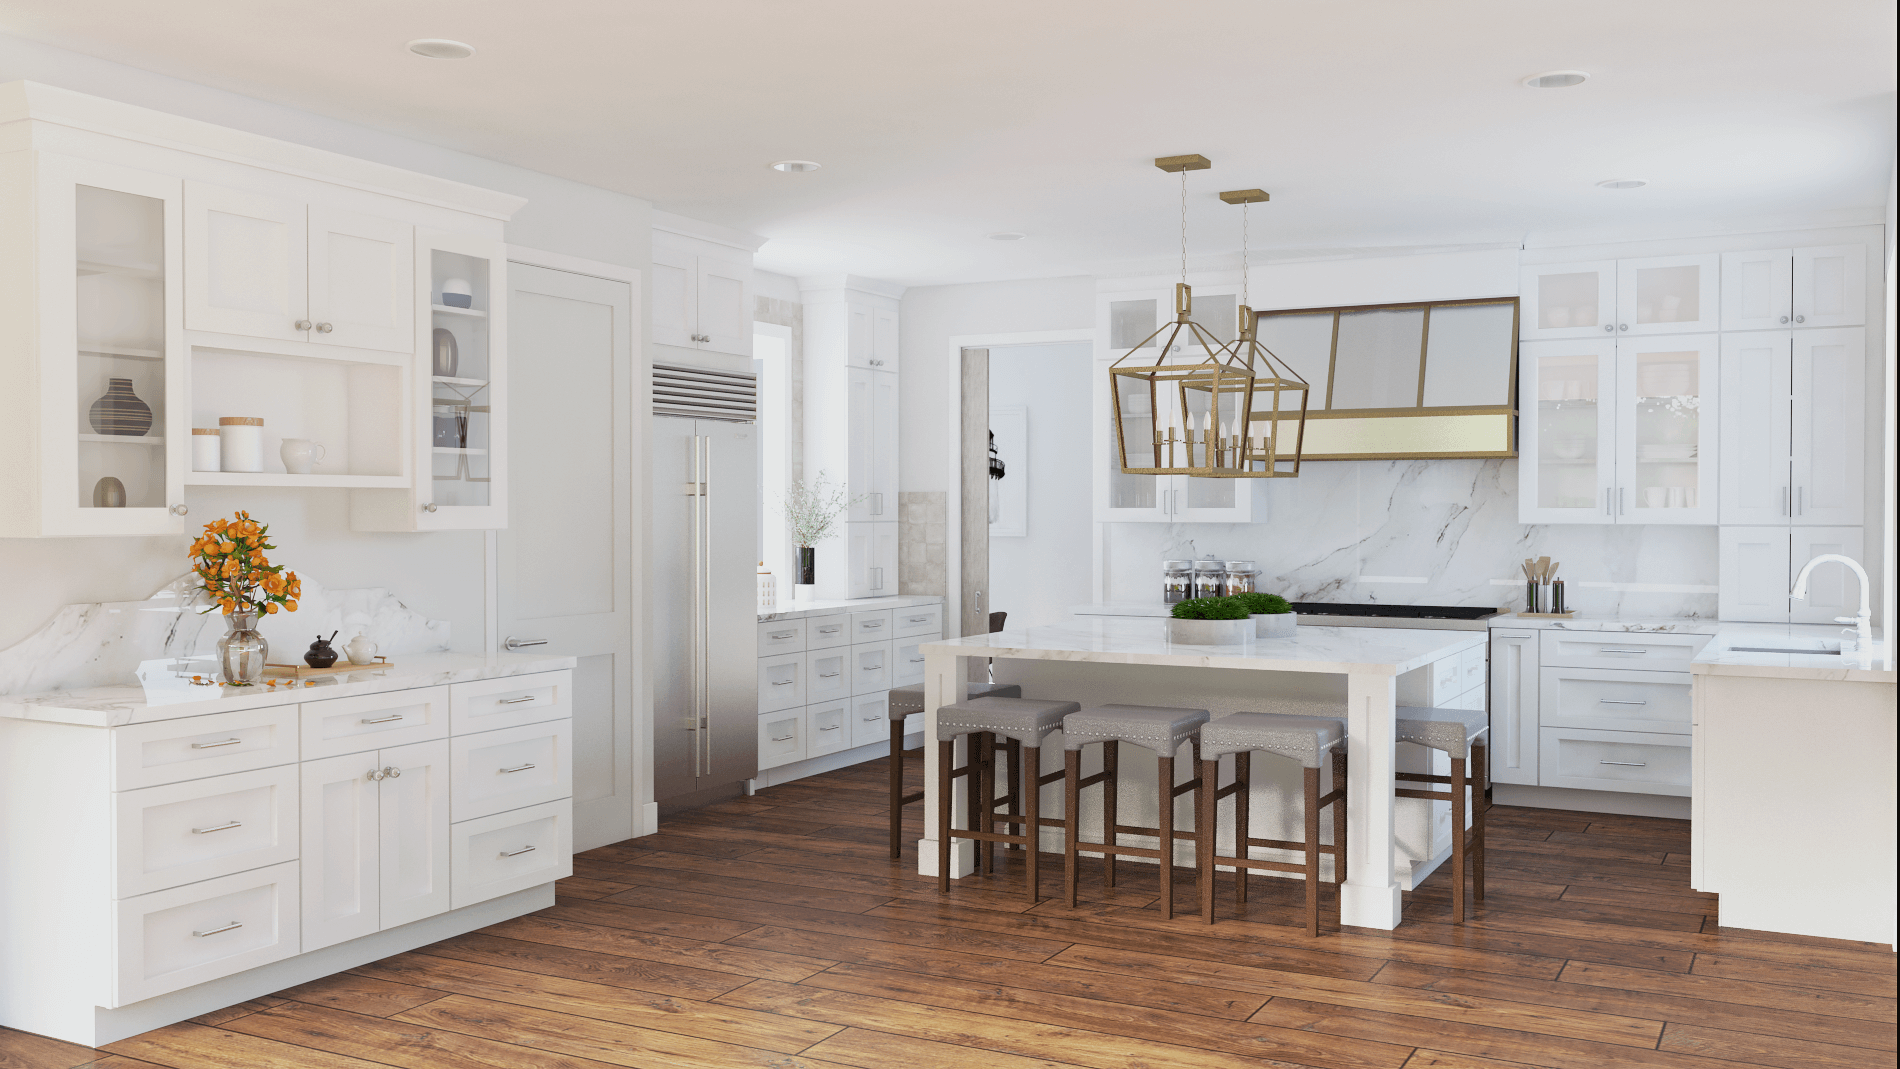 White kitchen with shaker cabinets and small island, Pendant lights, marble backsplash and wooden flooring